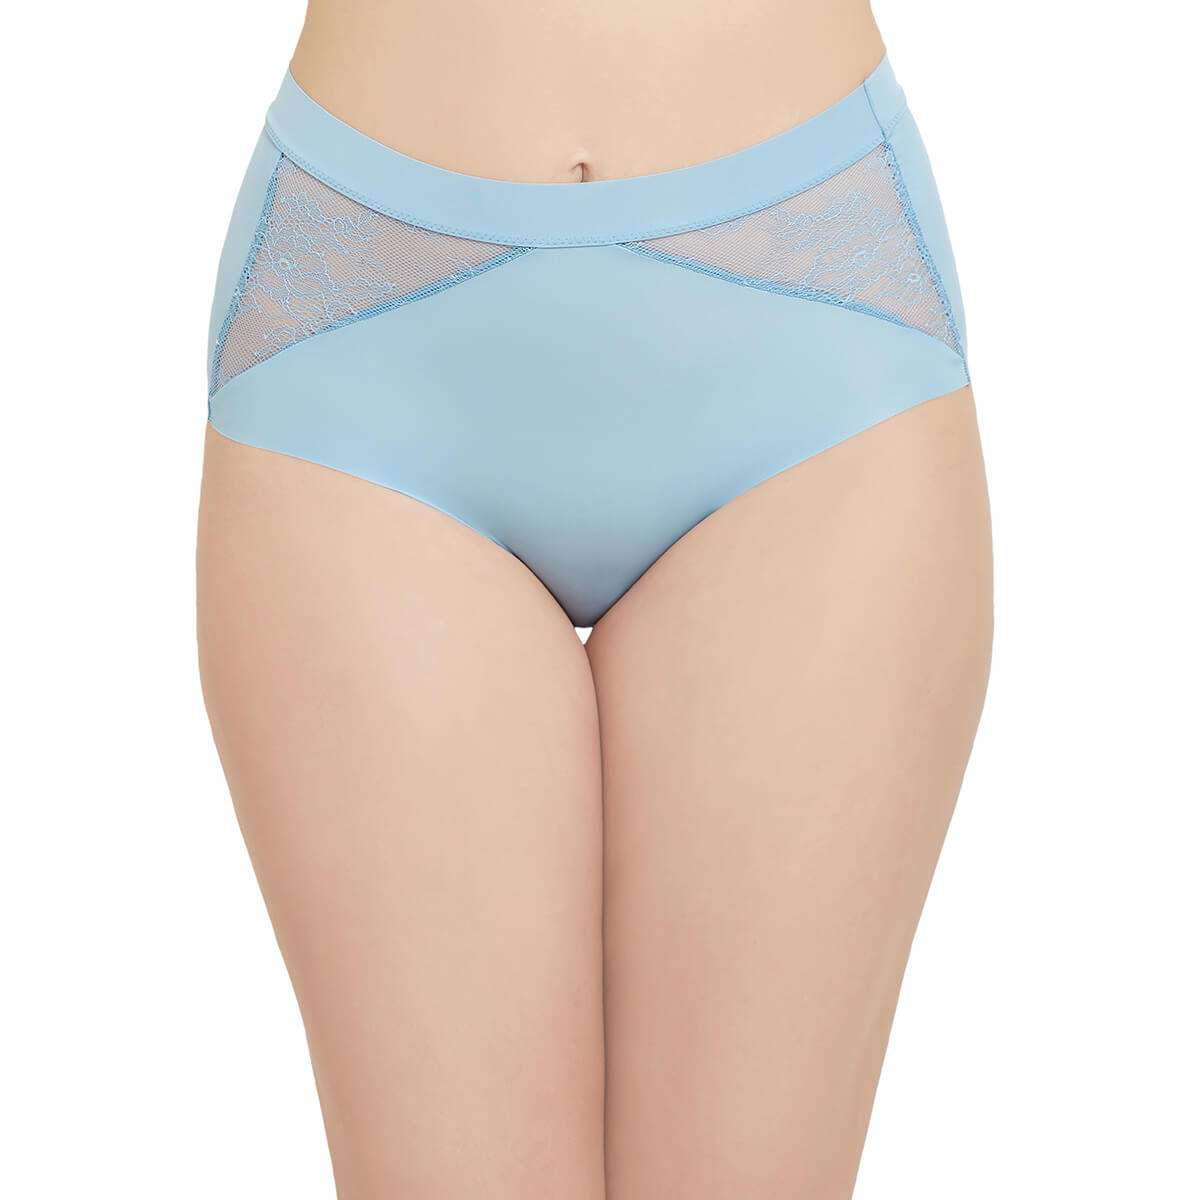 Full Brief Panties: Save Upto 70% on Purchase of Ladies Full